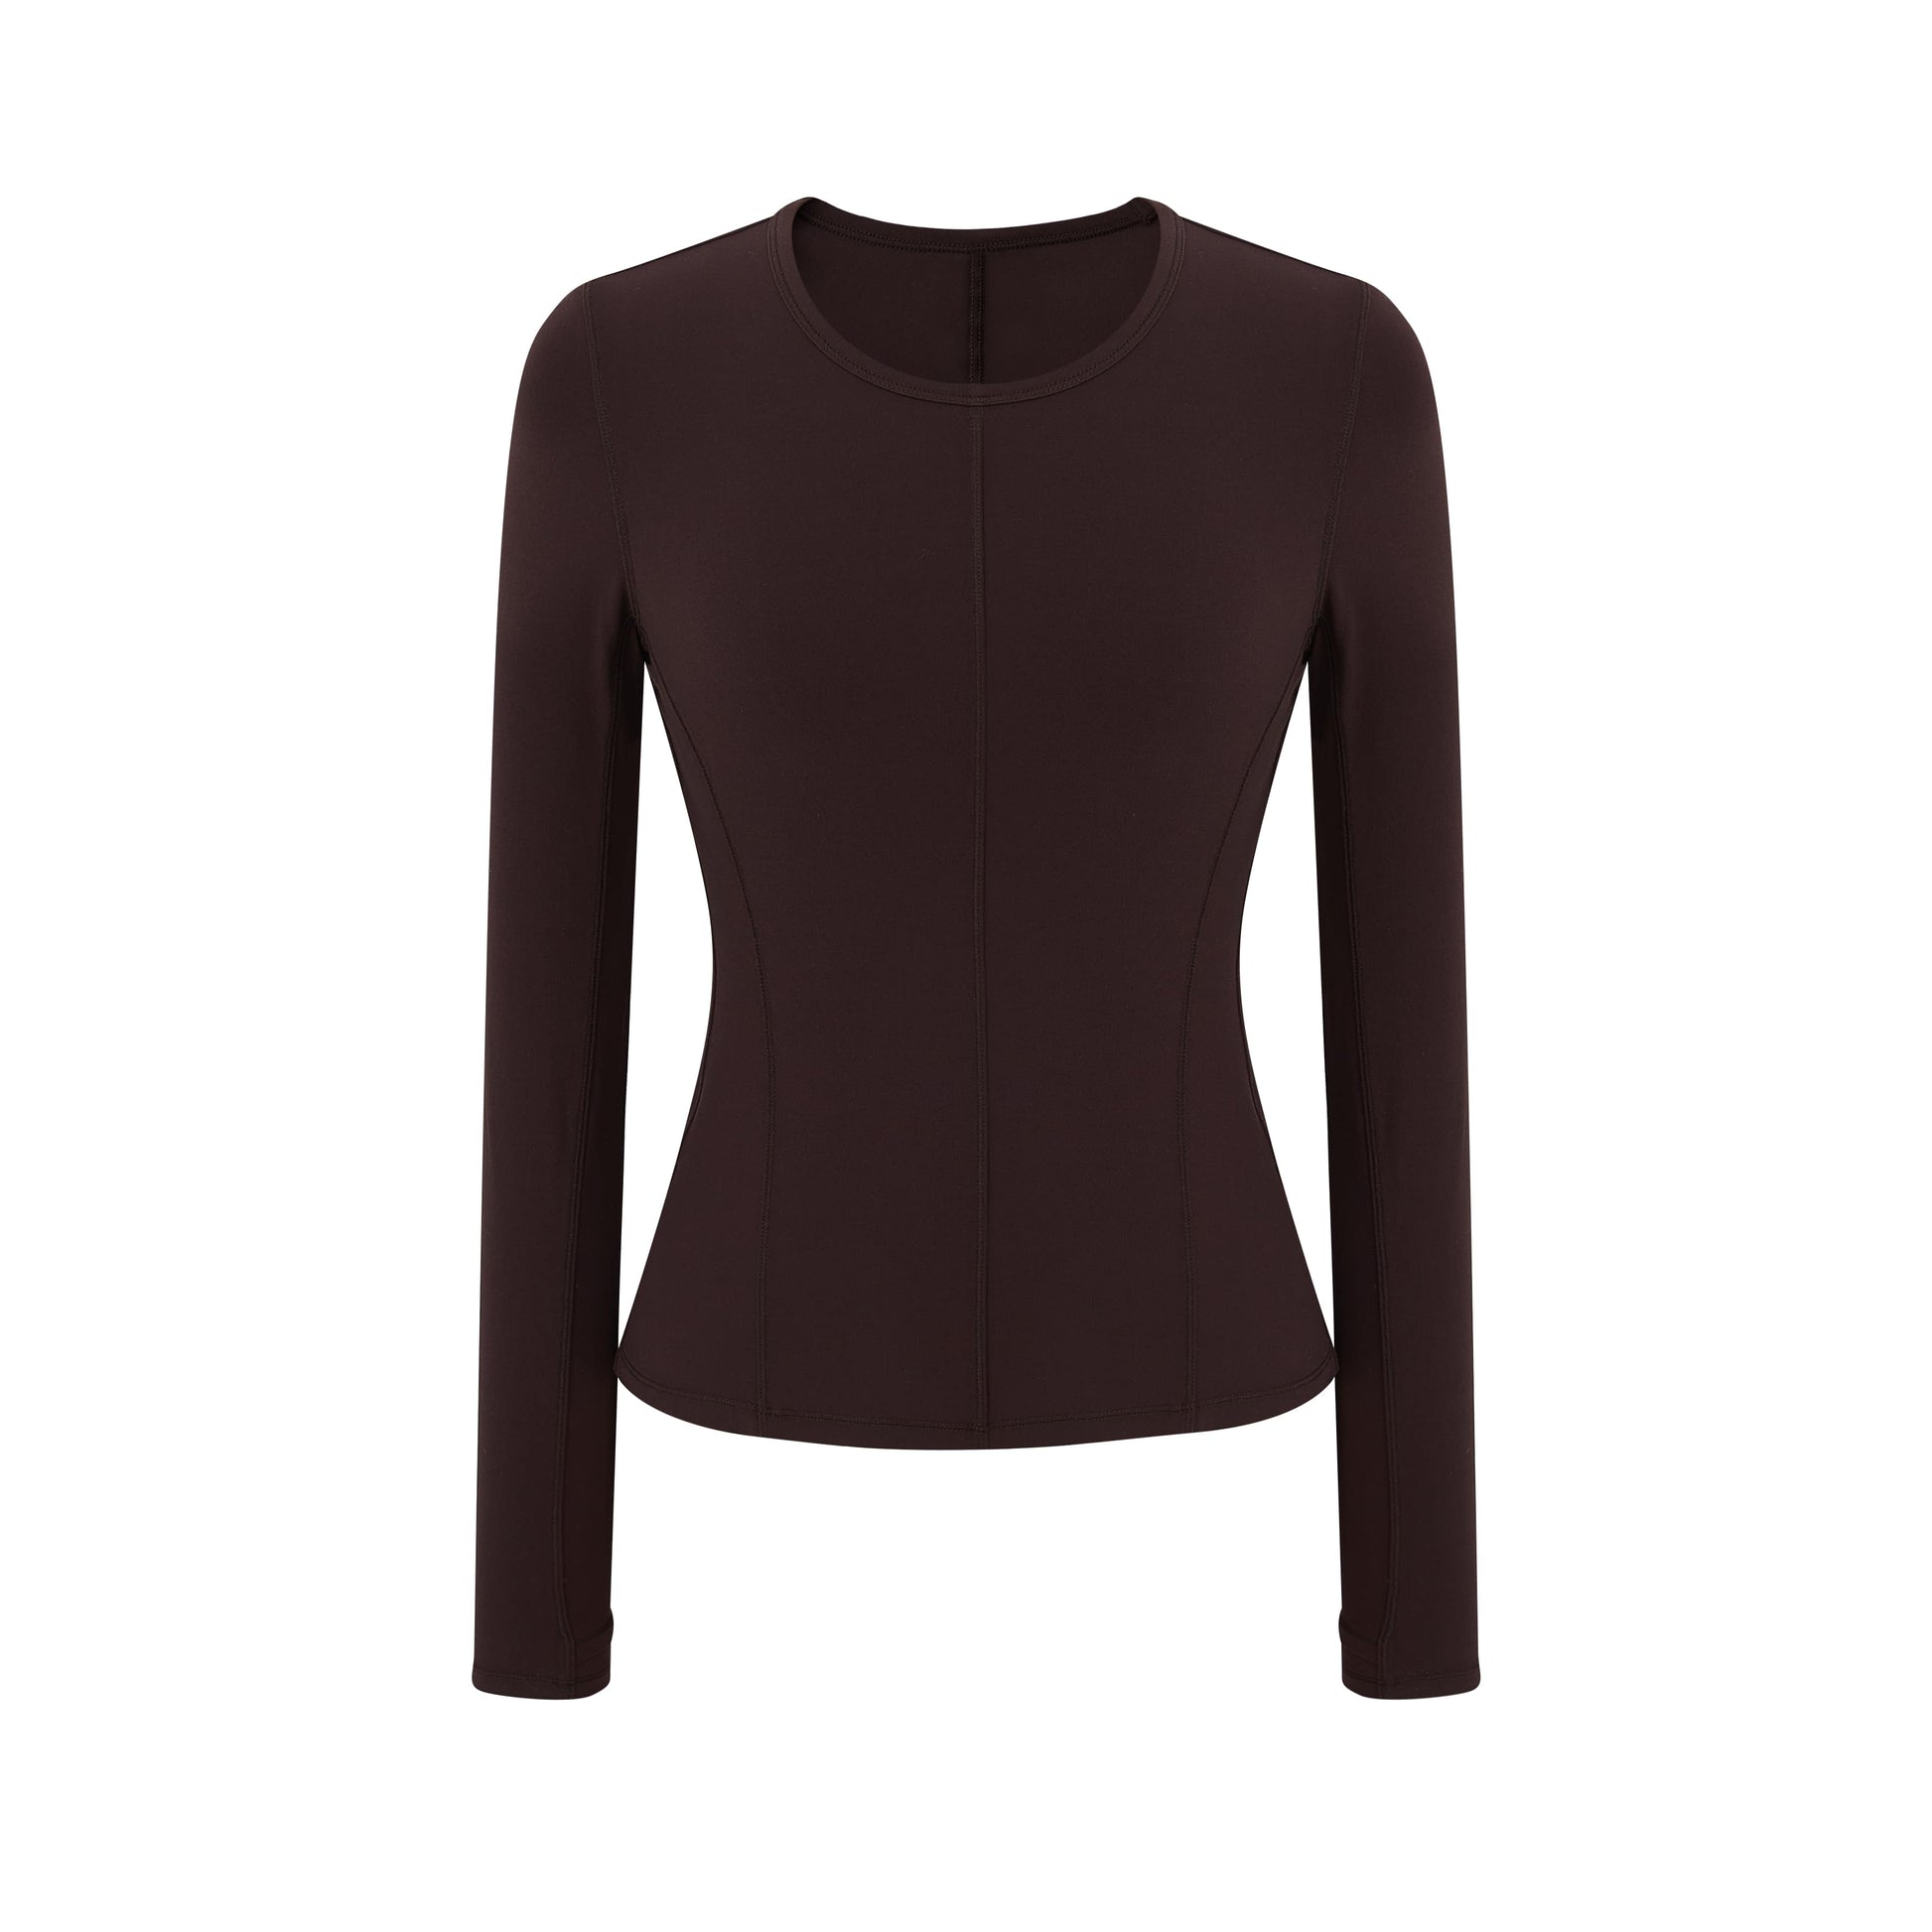 a brown mousse long sleeve sports top